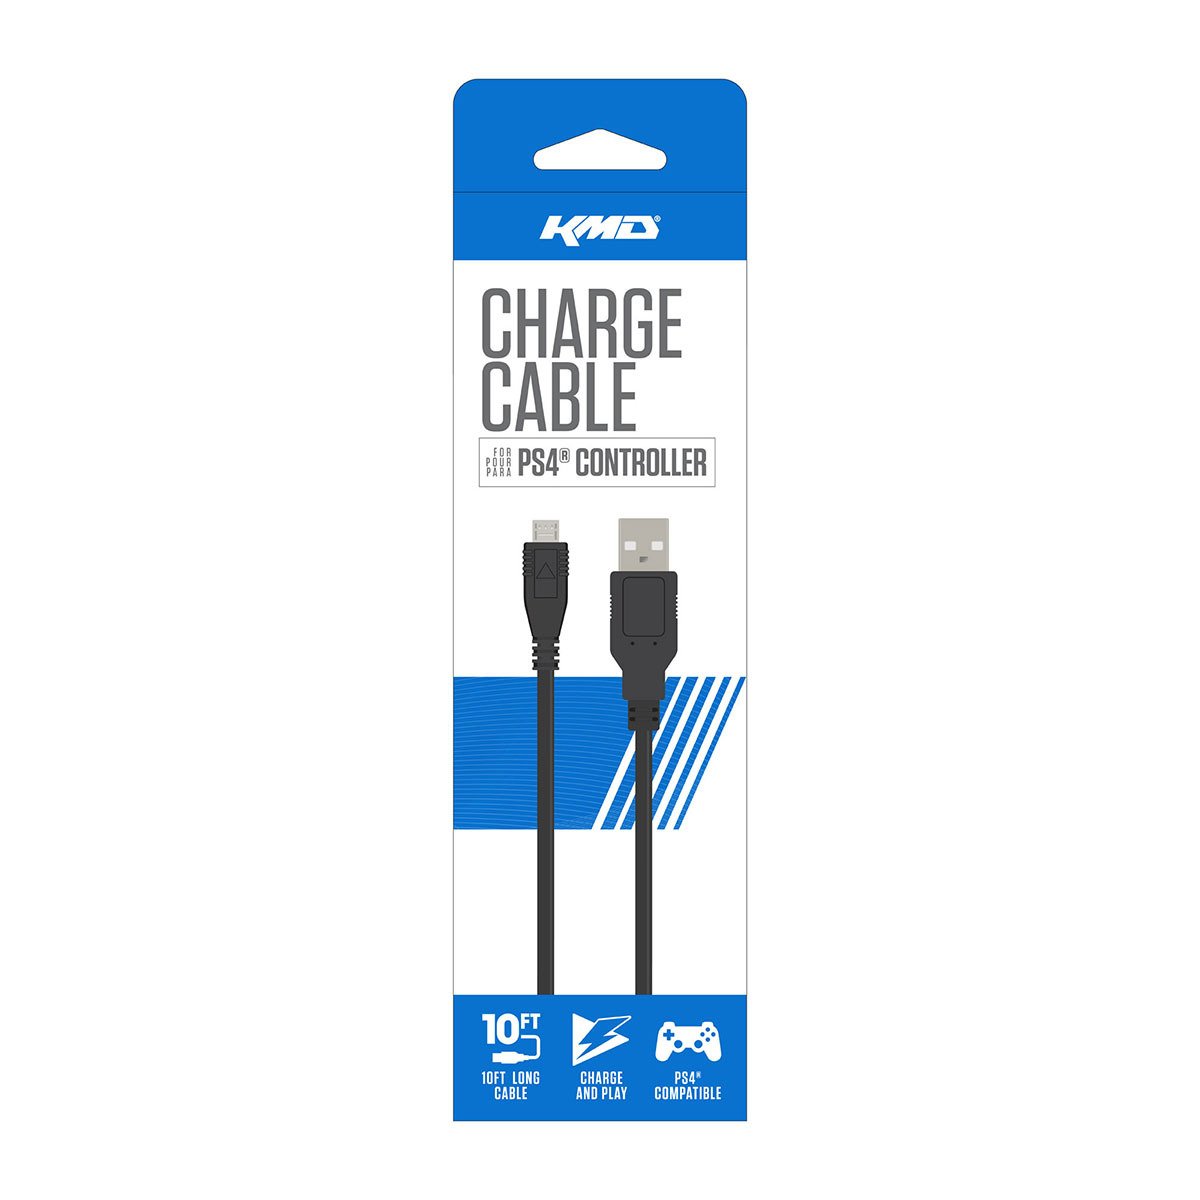 CHARGE CABLE 10FT PS4 CONTROLLER KMD